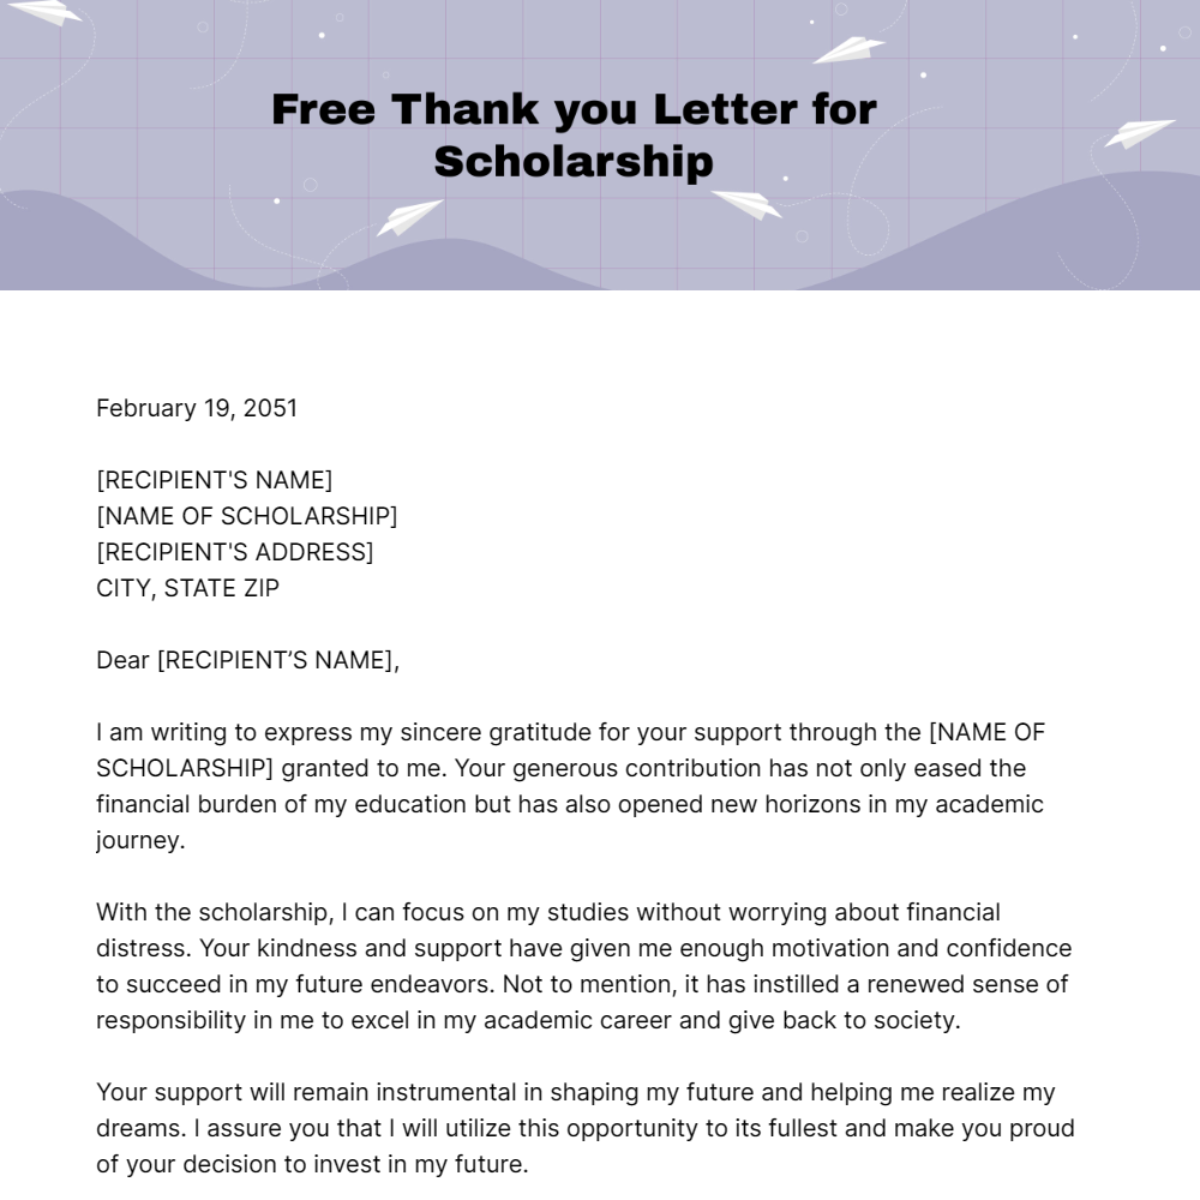 Thank you Letter for Scholarship Template